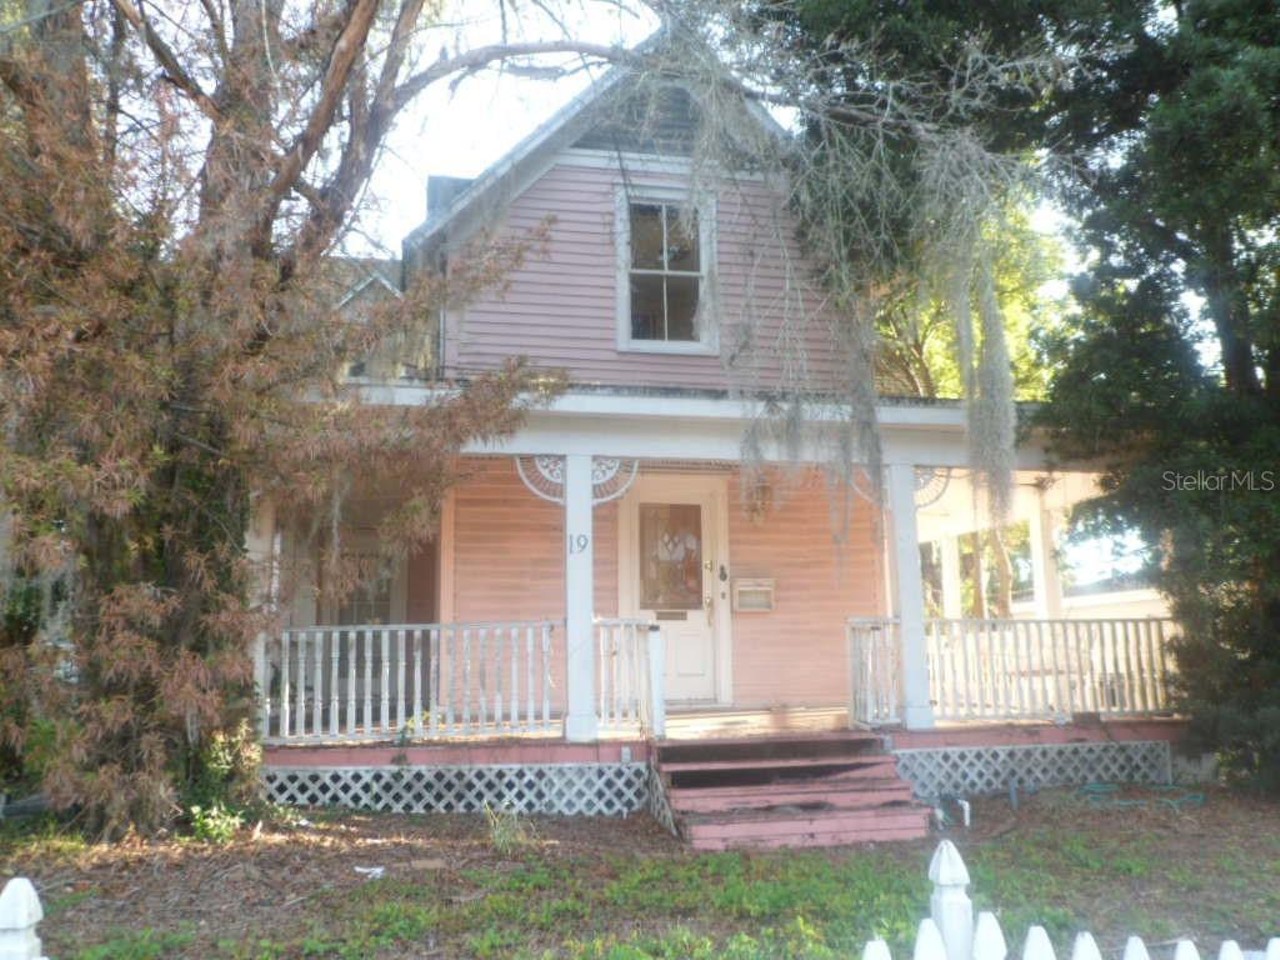 Let's take a tour of this 110-year-old house for sale in College Park